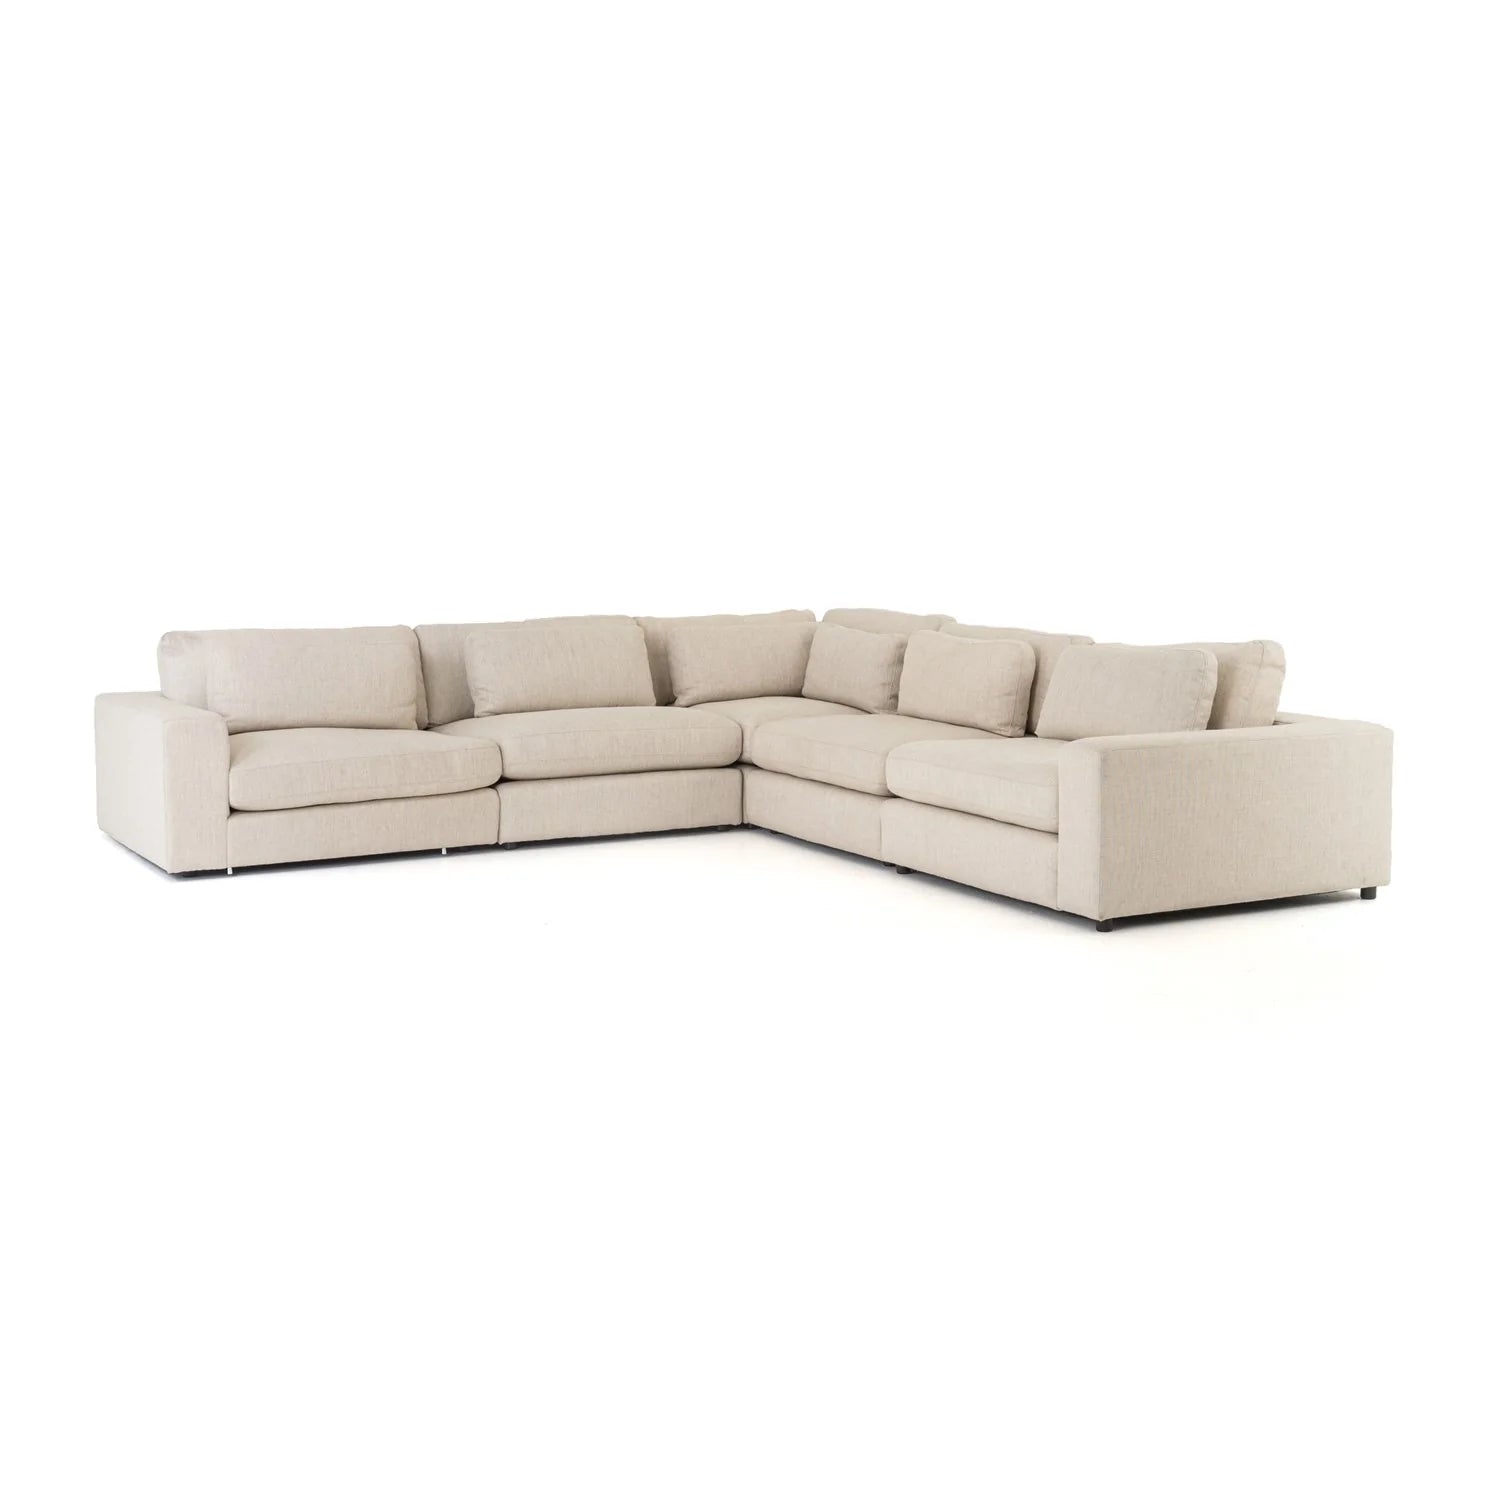 BLOOR 5-PIECE SECTIONAL IN VARIOUS COLORS